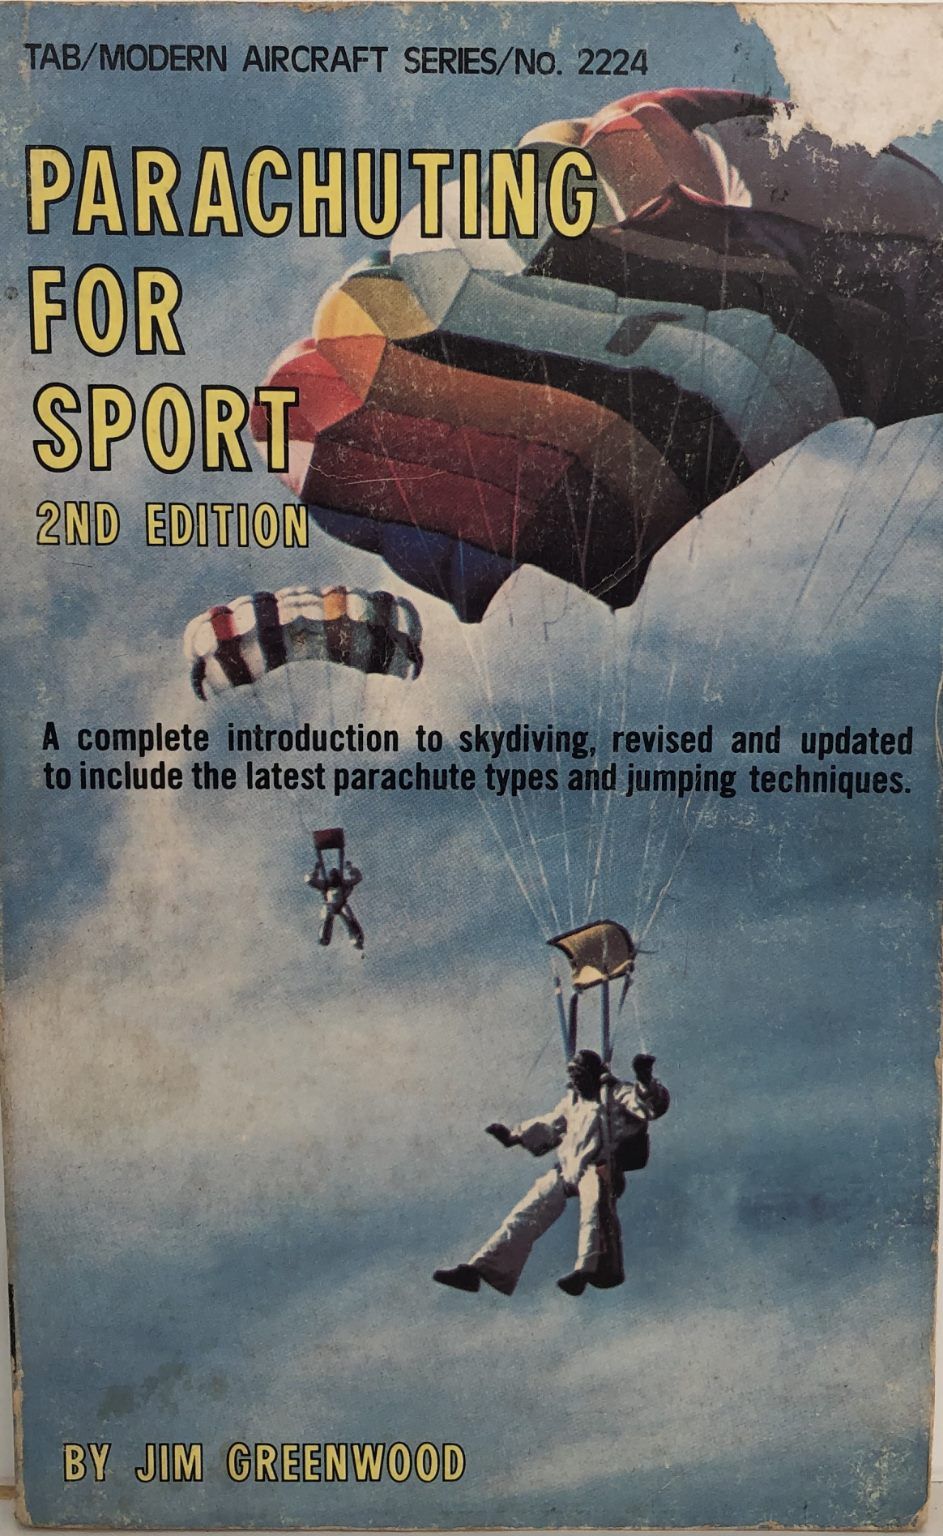 PARACHUTING FOR SPORT: A complete introduction